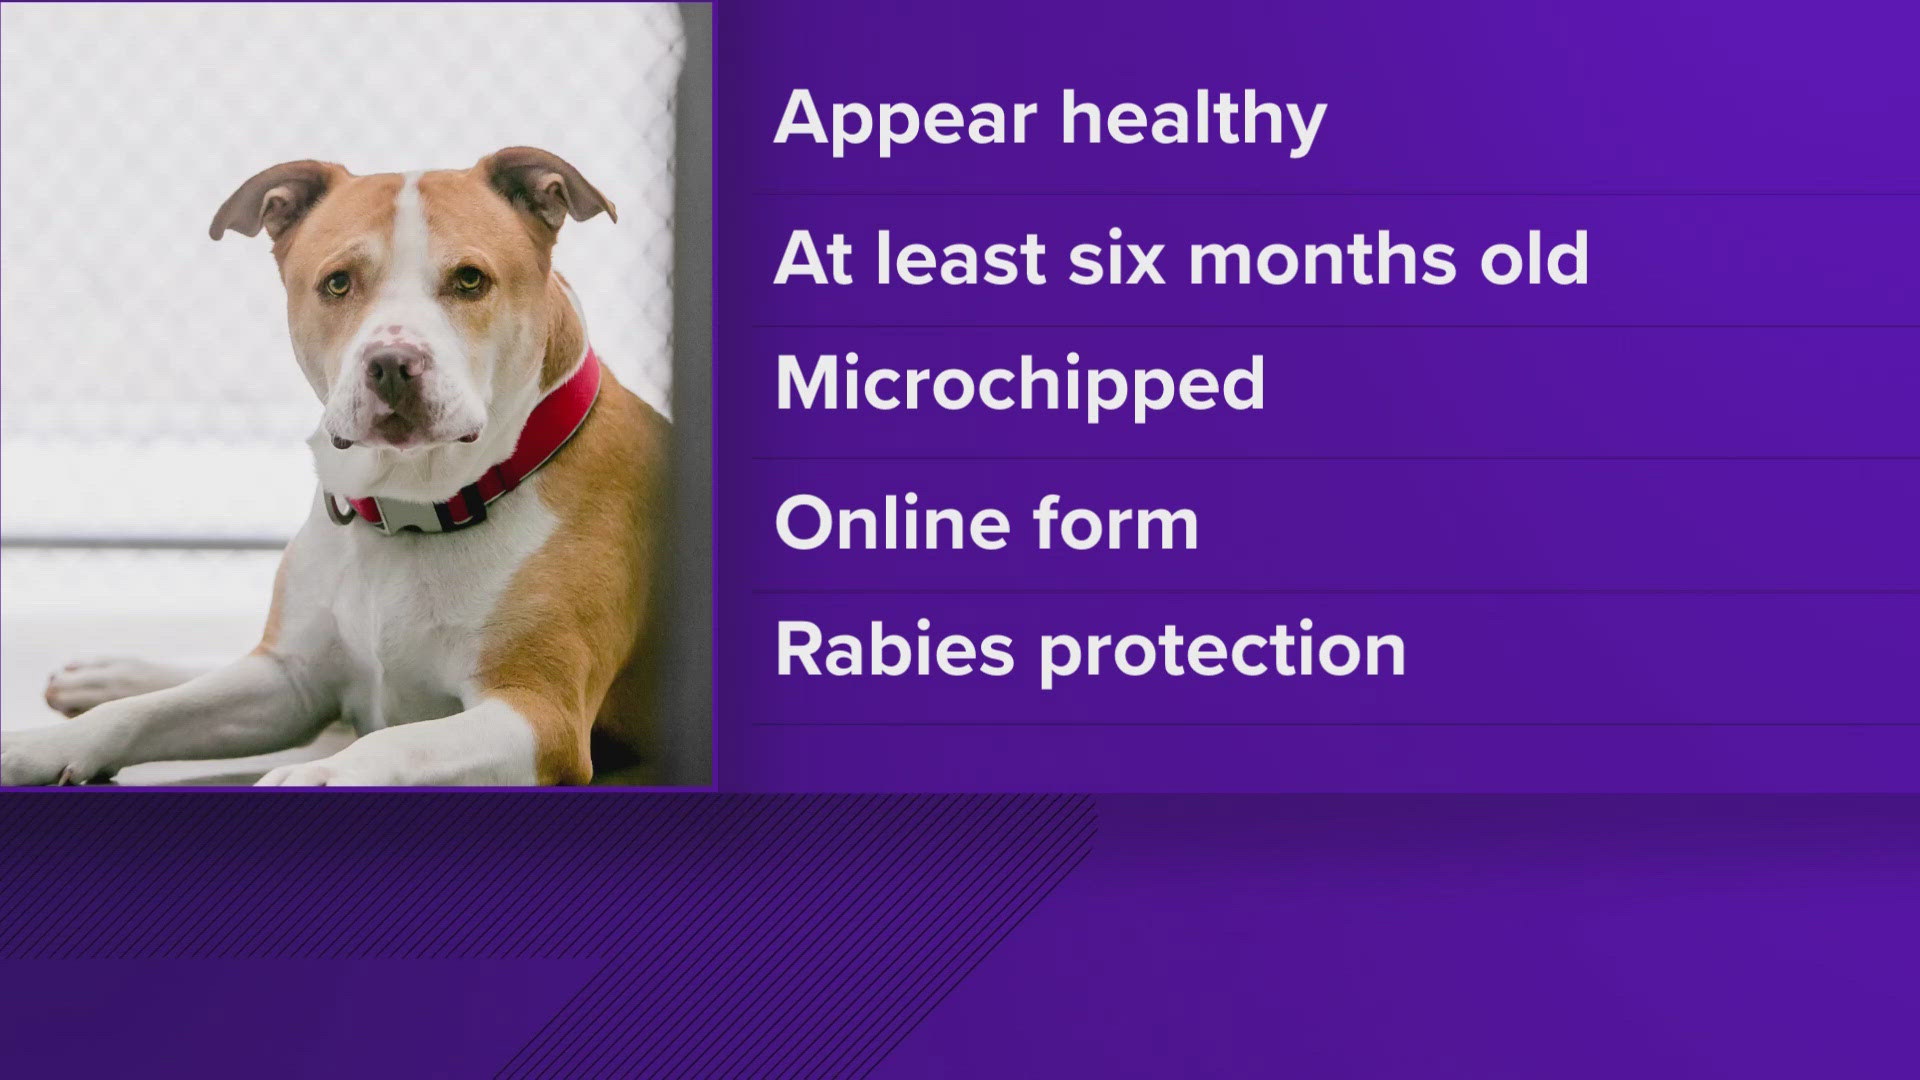 The update applies to dogs brought in by breeders or rescue groups as well as pets traveling with their U.S. owners.